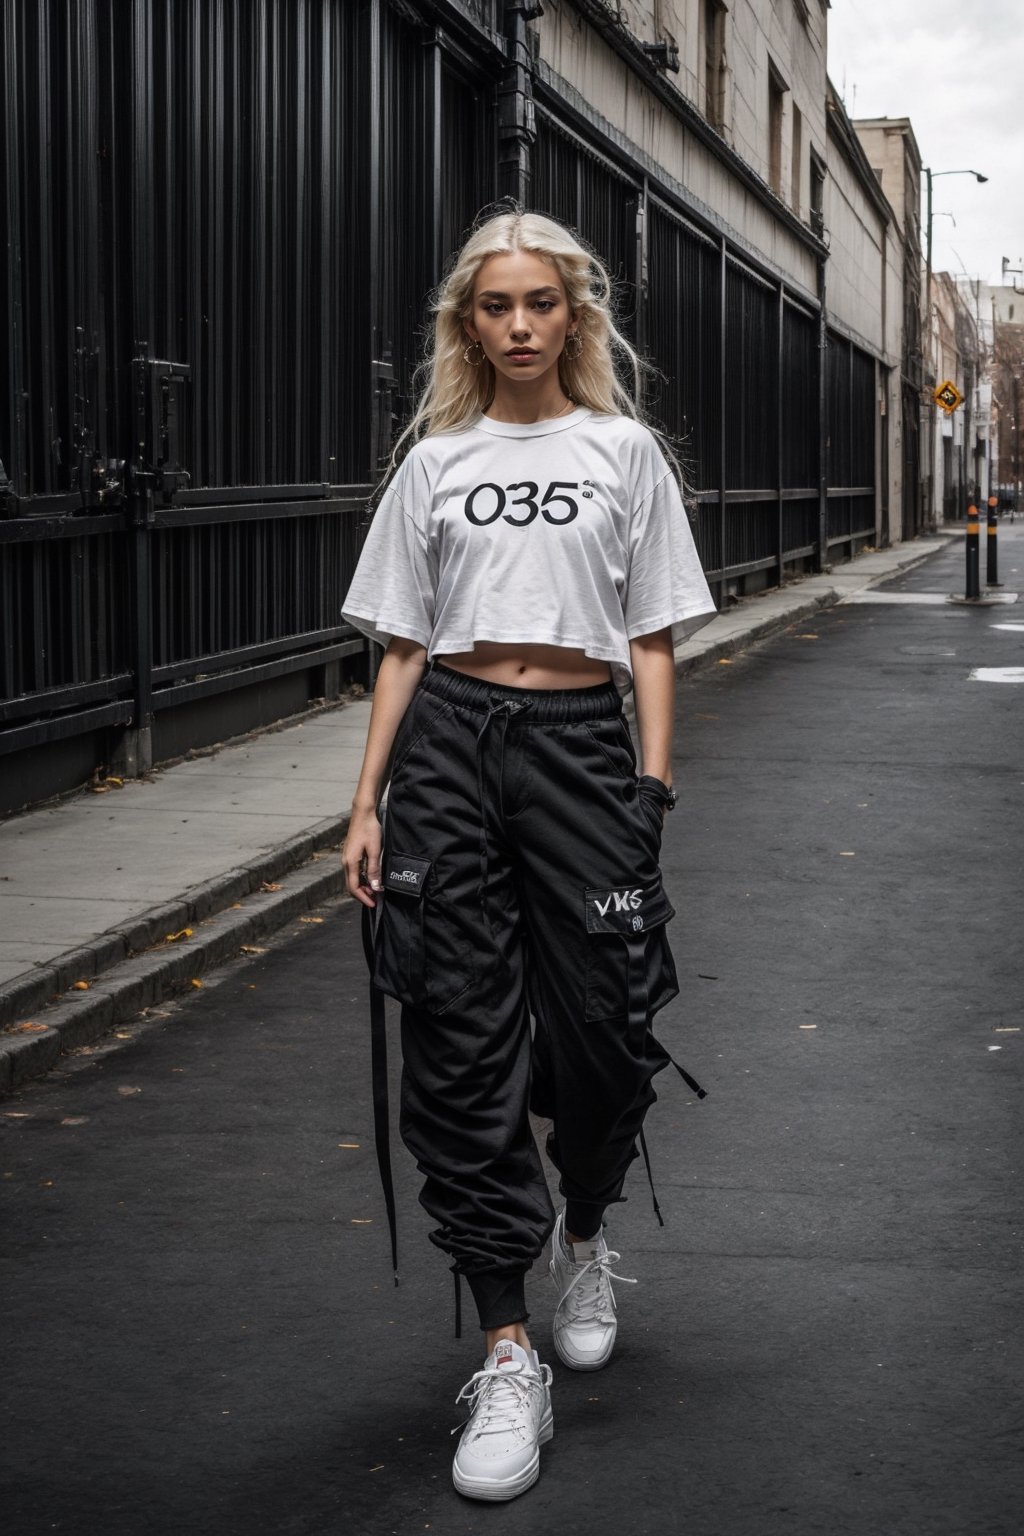 1girl, young pretty white girl, hot top model, long blonde hair, wearing a white oversize t shirt (t shirt only white color) and Acronym J36-S black pants and Acronym P30A-DS and black and white sneakers, piercings, in city, instagram model, 80mm,urban techwear,weapon